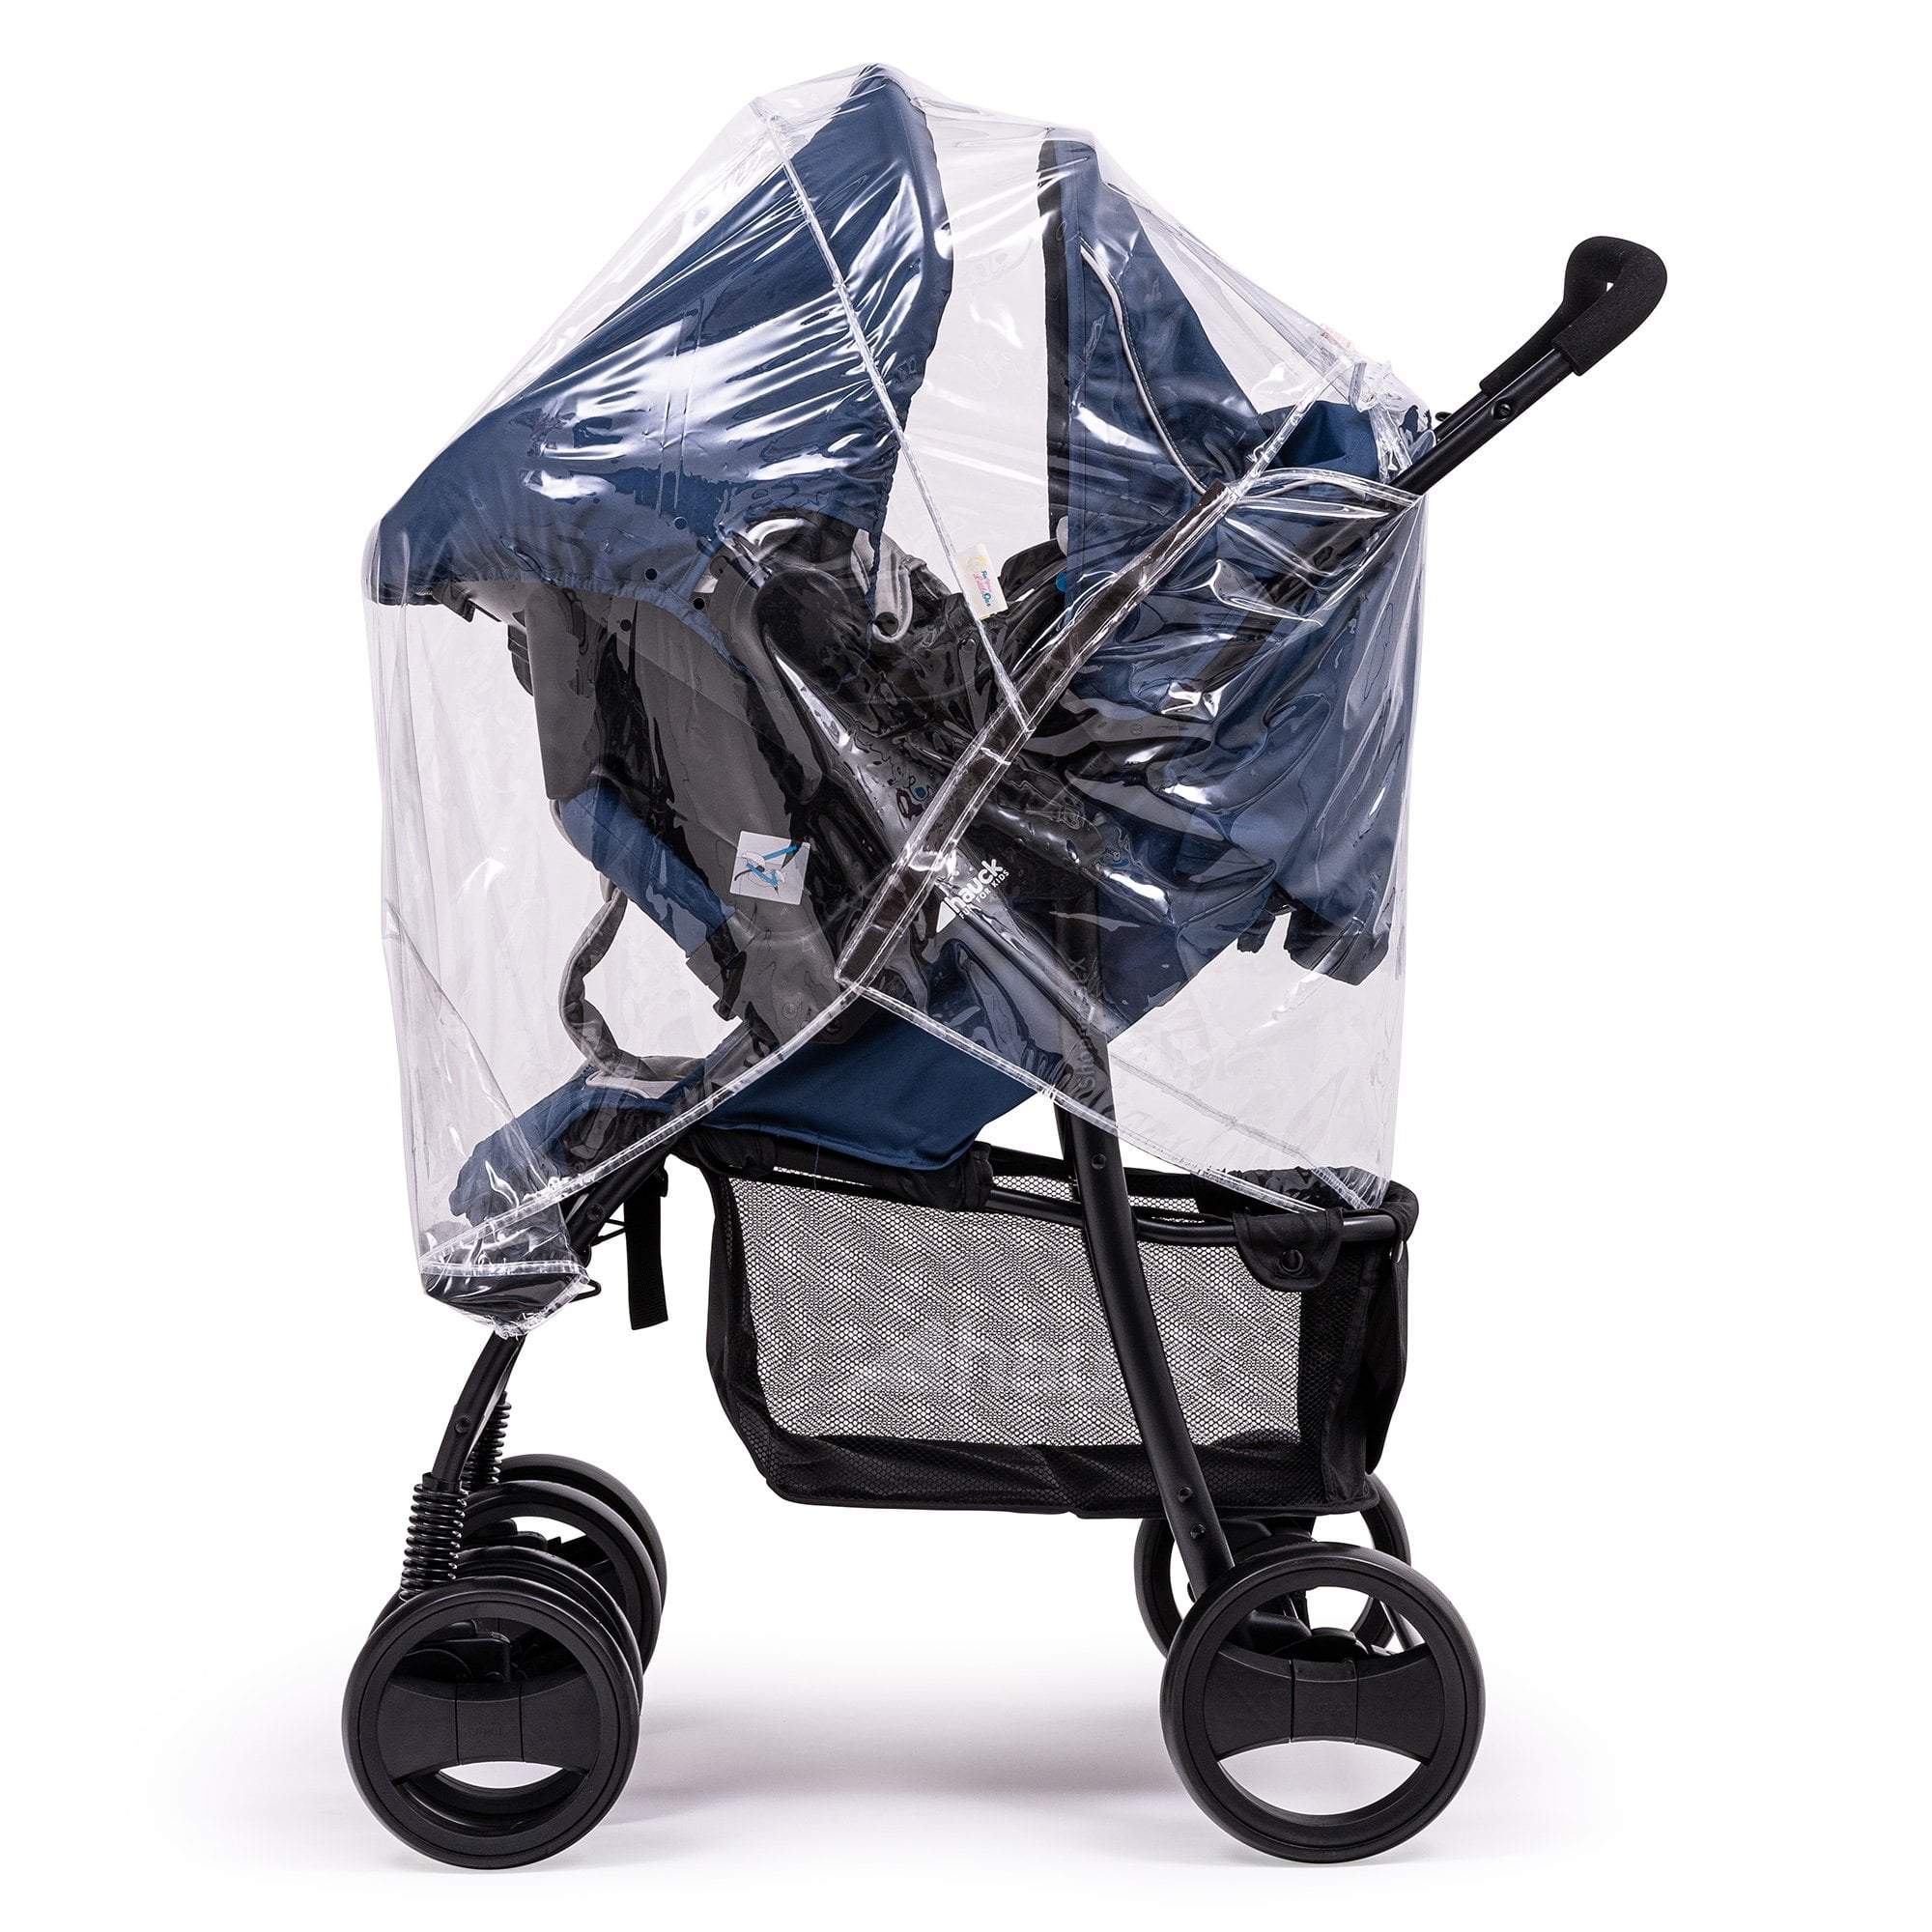 Travel System Raincover Compatible with BabyCare - Fits All Models - For Your Little One